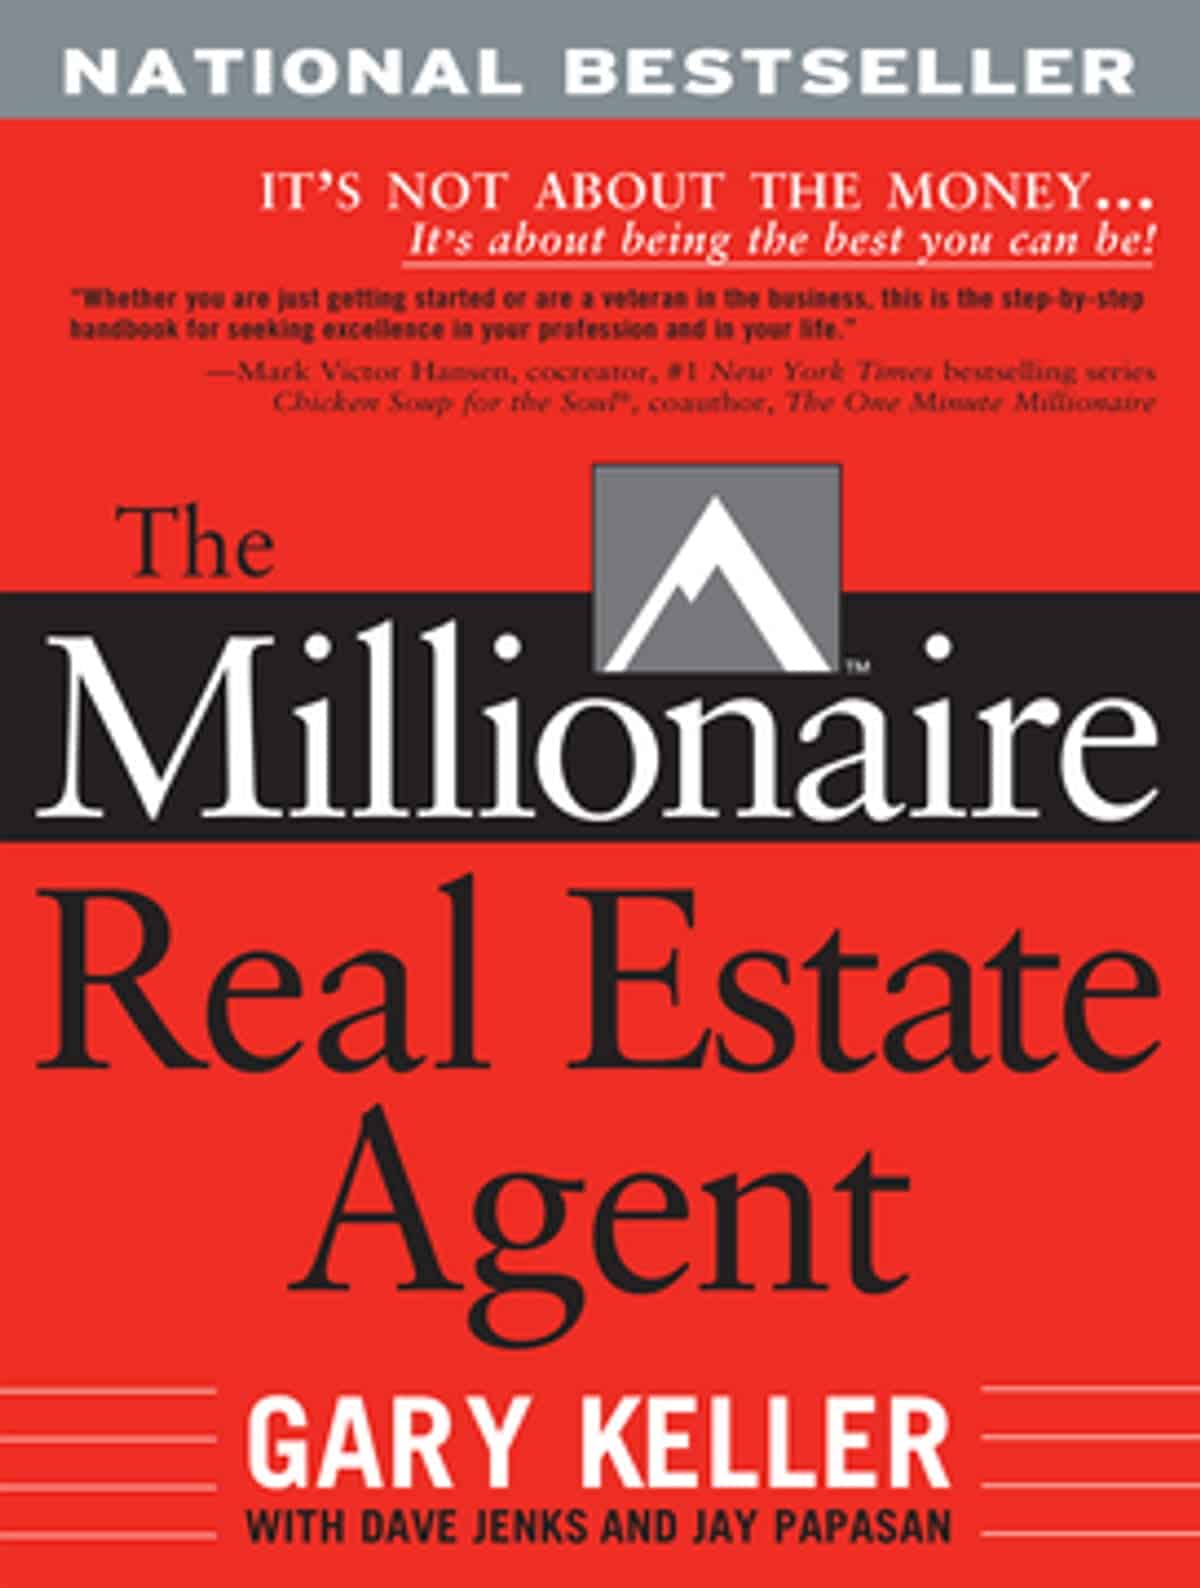 The Millionaire Real Estate Agent written by Gary Keller book cover